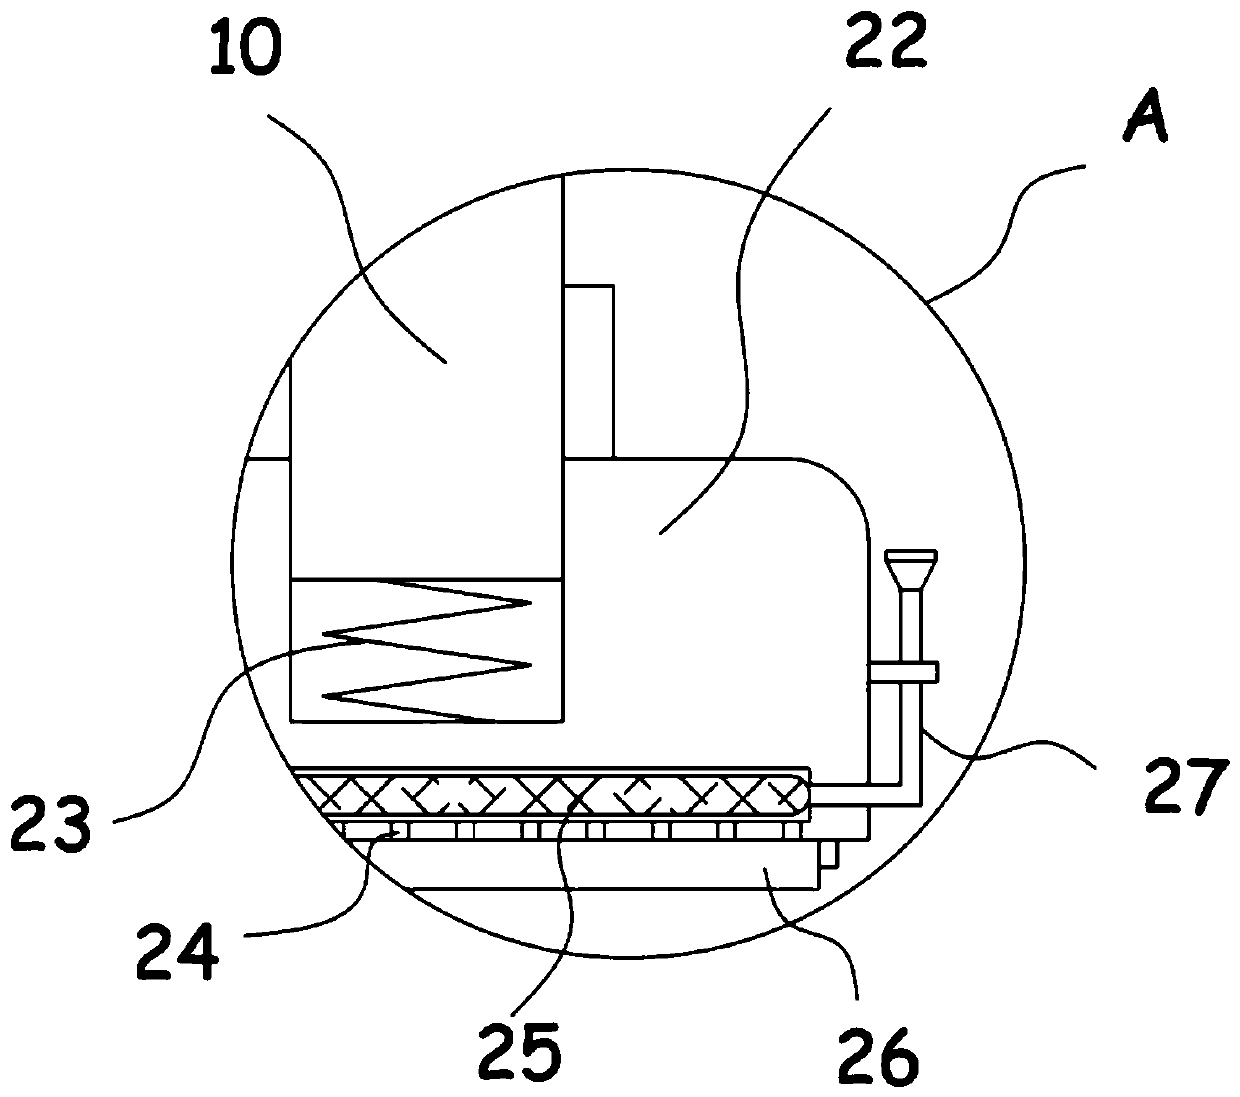 Rapid stamping device for financial accounting